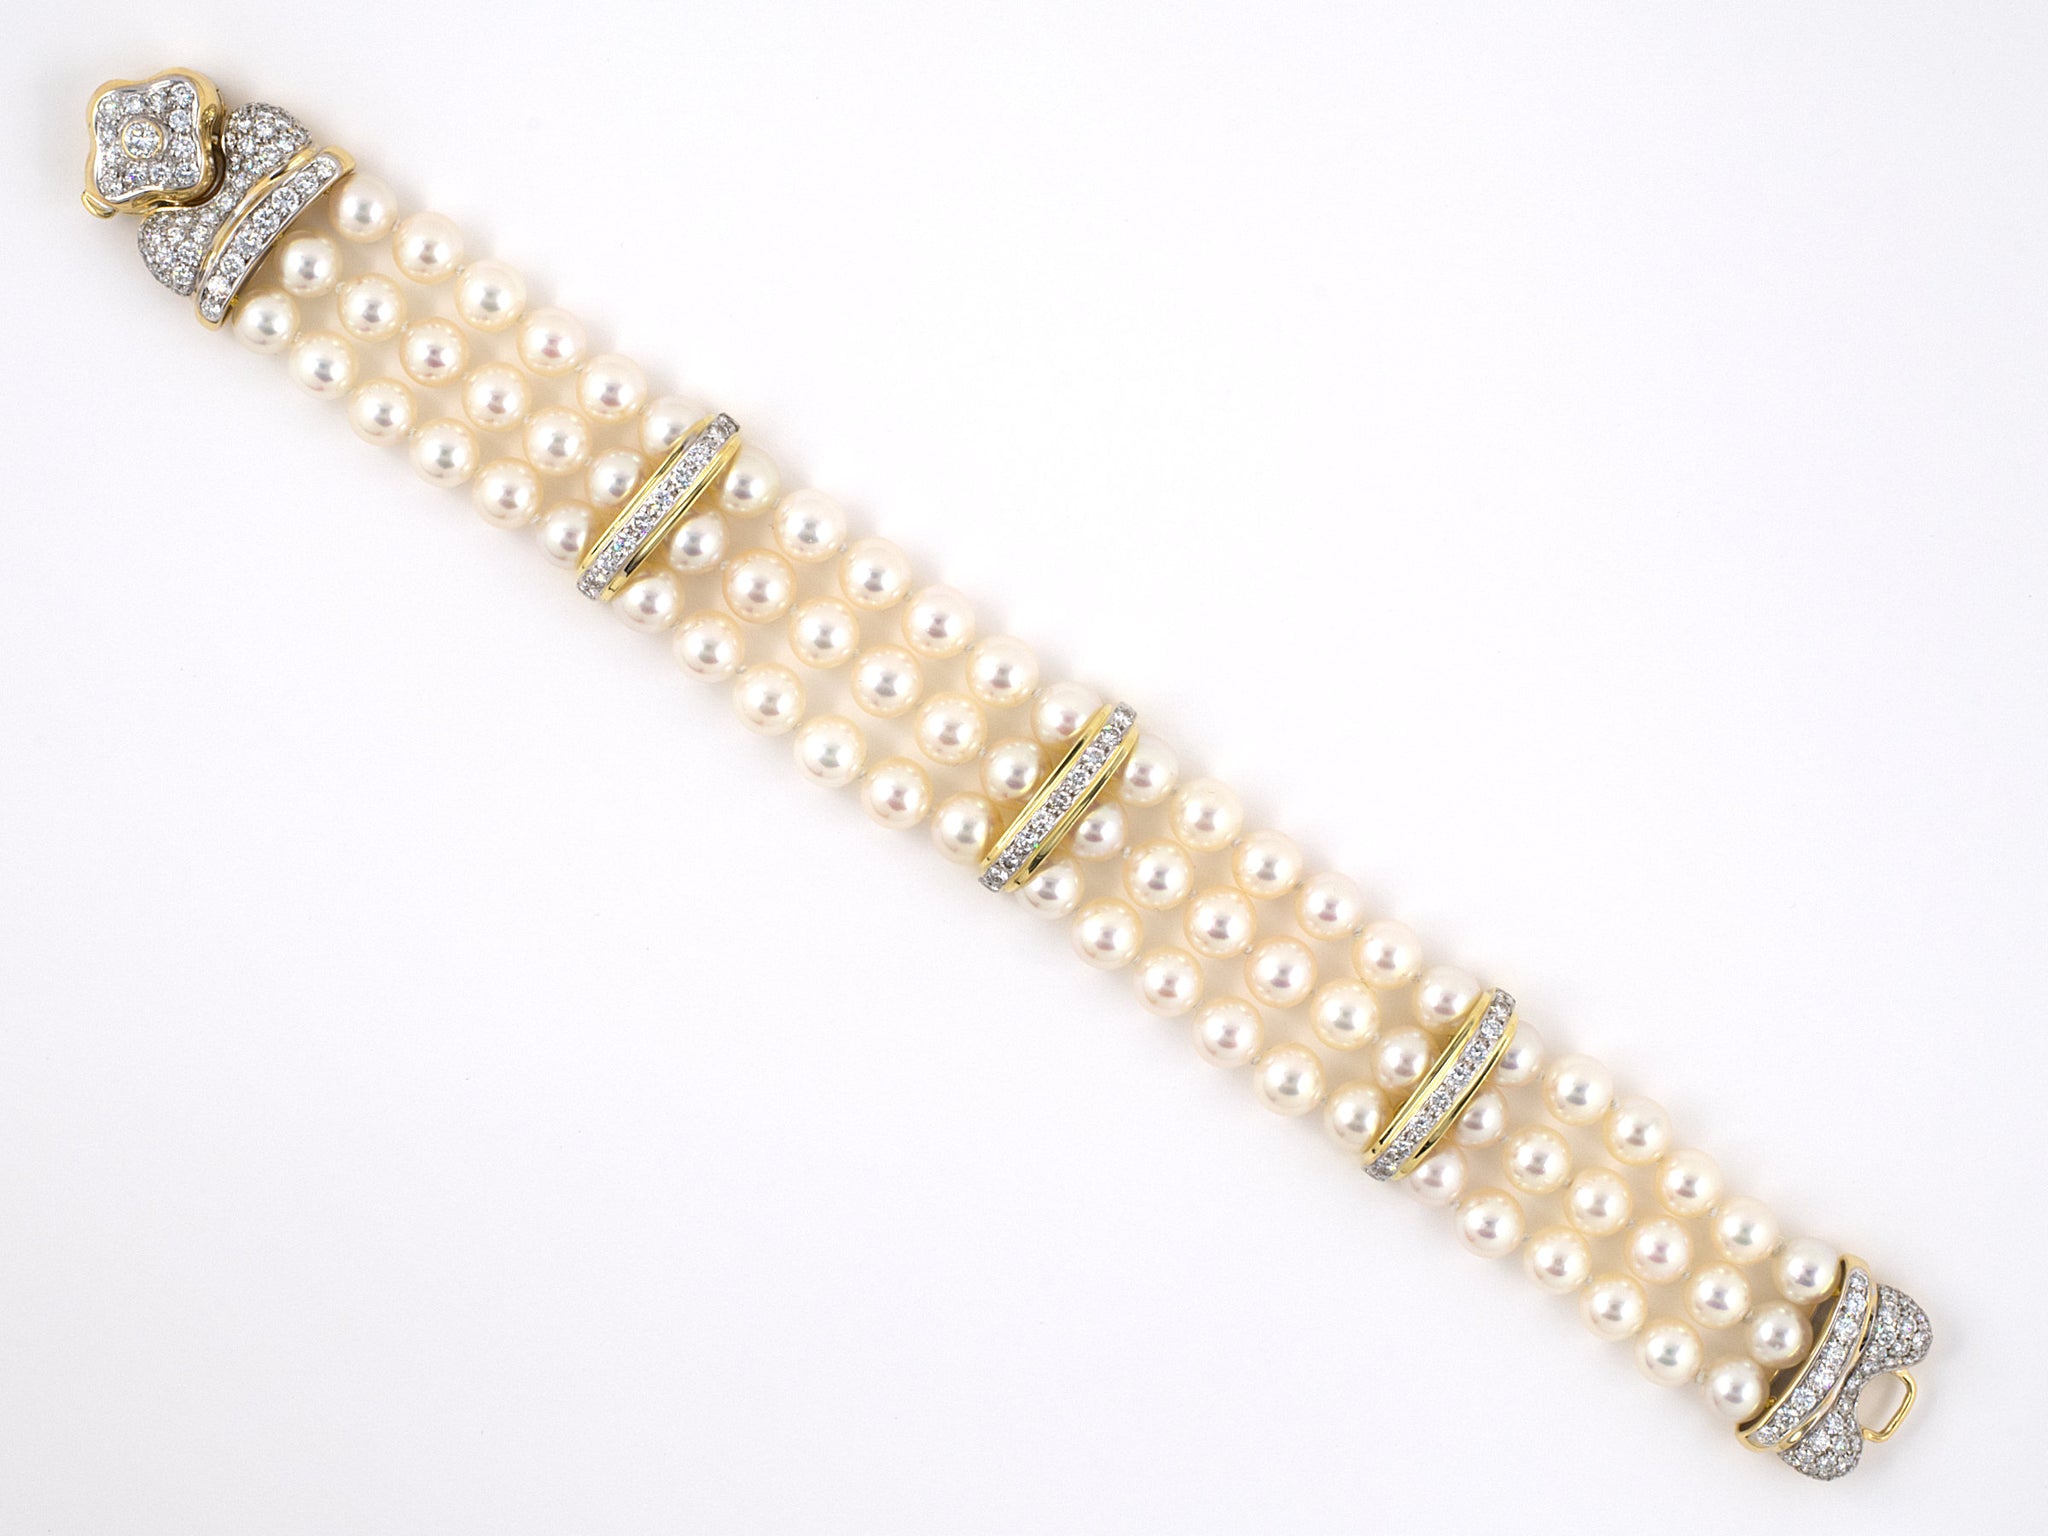 Bradleys - Simply Stunning Pearl Bracelet 3 Row with Diamond Clasp in stock  with Bradleys The Jewellers available for £19,500.00 Shop Now  https://shortlink.store/77XgXU2w-A | Facebook